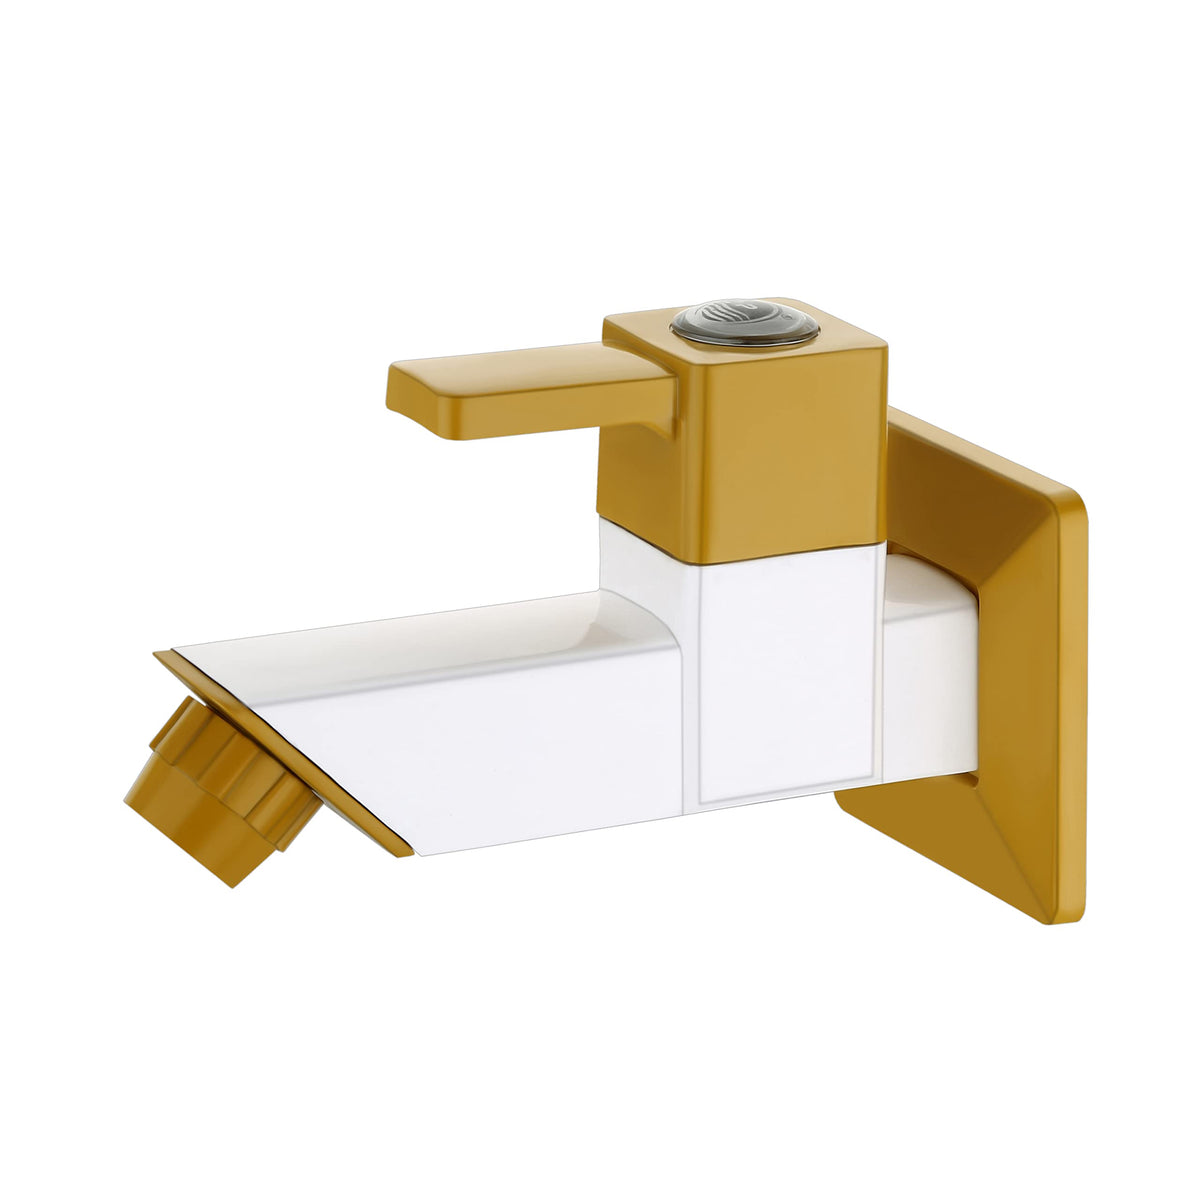 Primax PTMT EDS-121 Single Lever Bib Coak (Short Body) for Bathroom/Kitchen Sink Tap/Basin Faucet with Plastic Wall Flange - (Yellow & White)